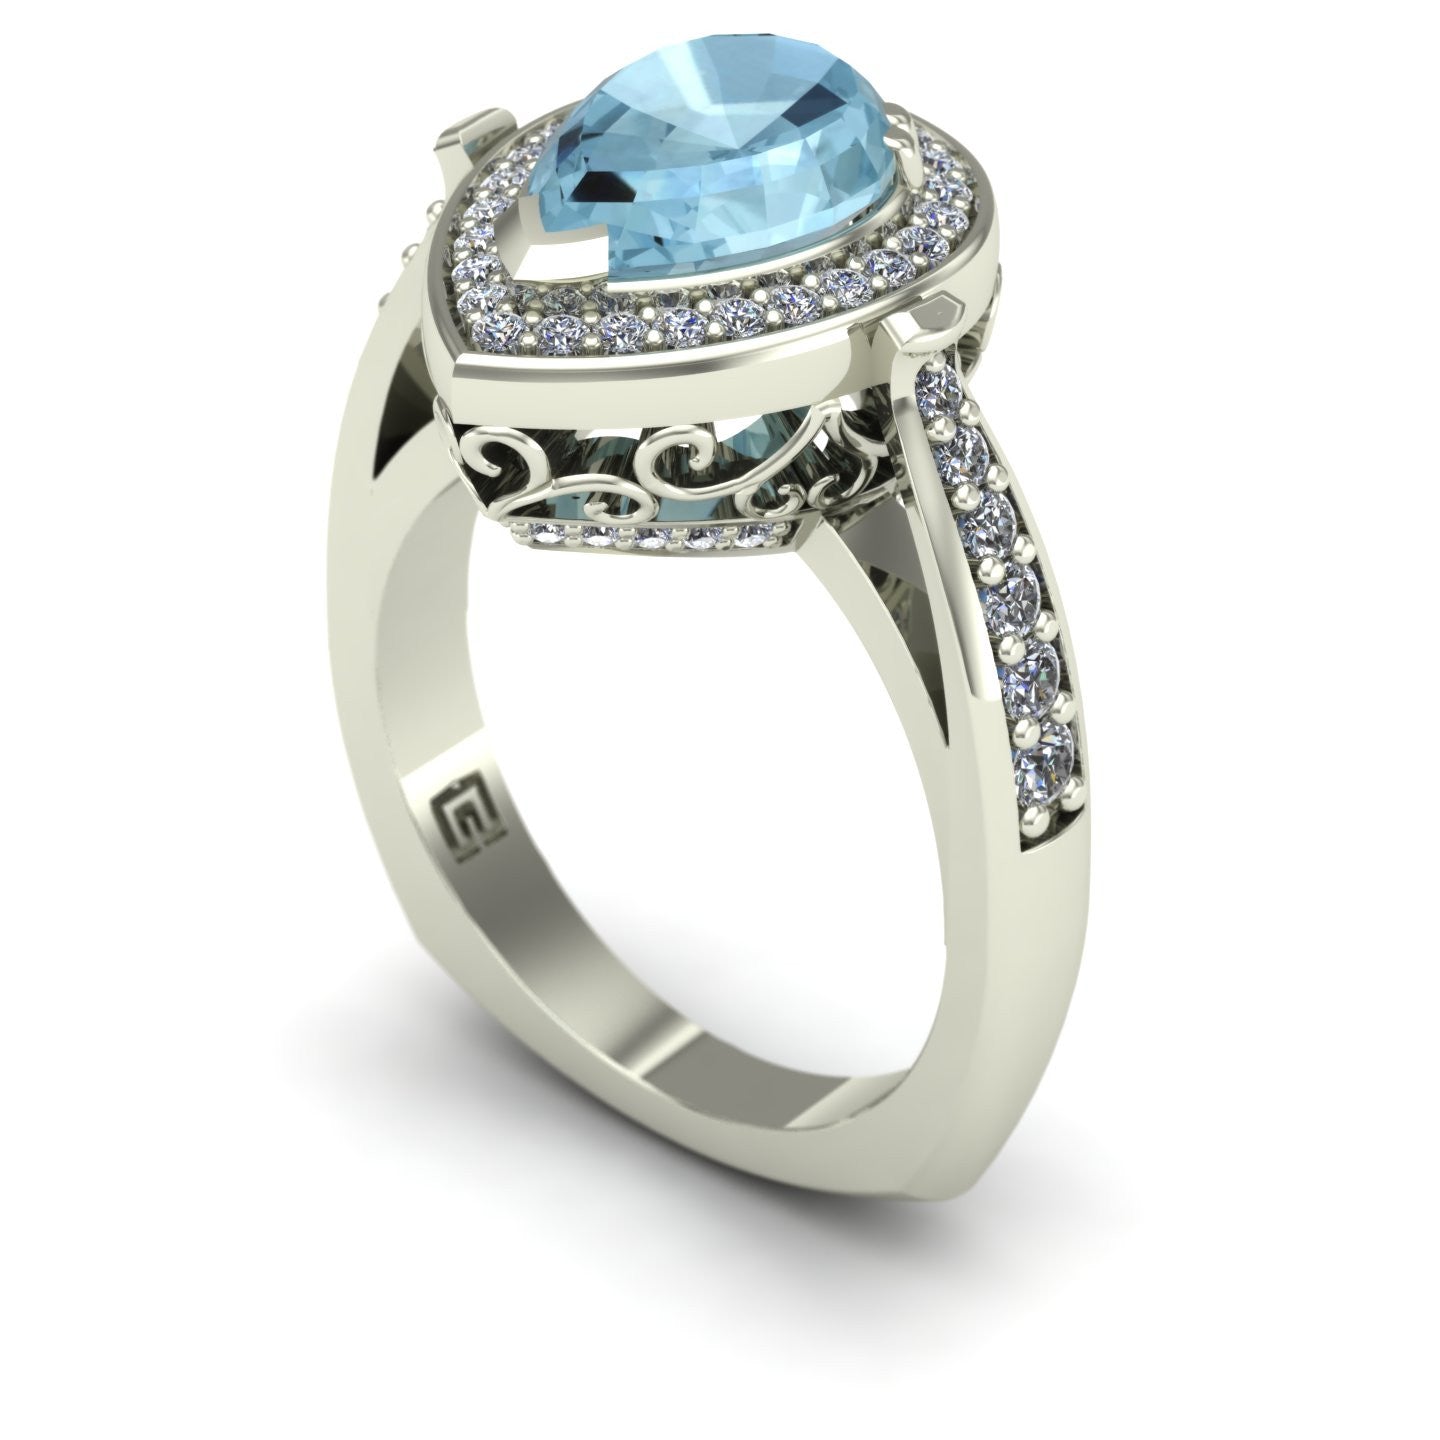 Aquamarine and diamond pear scroll ring in 14k white gold - Charles Babb Designs - 1